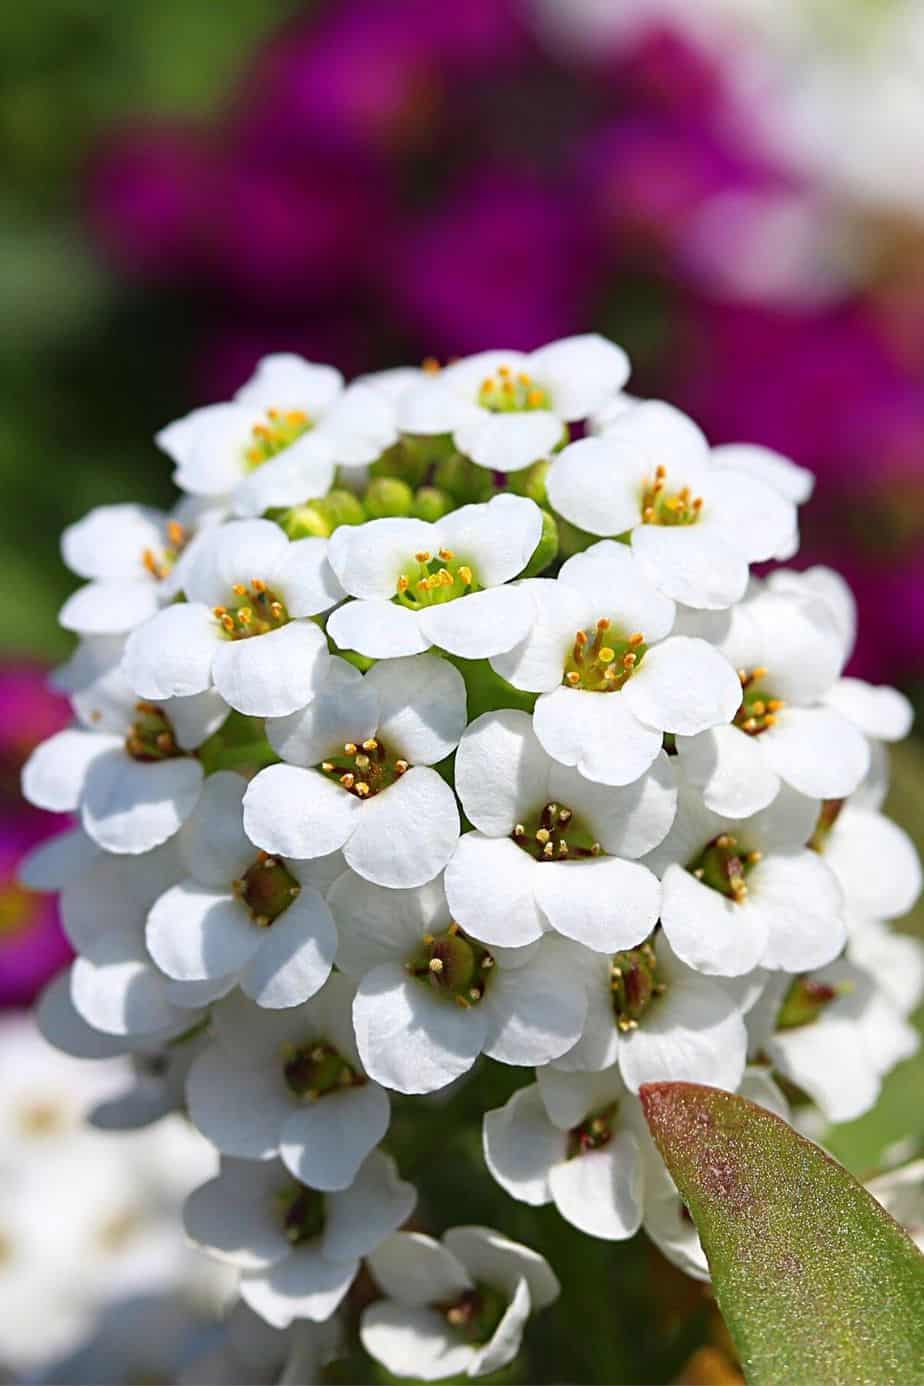 Sweet Alyssum is a great-smelling plant to grow on your southwest facing garden